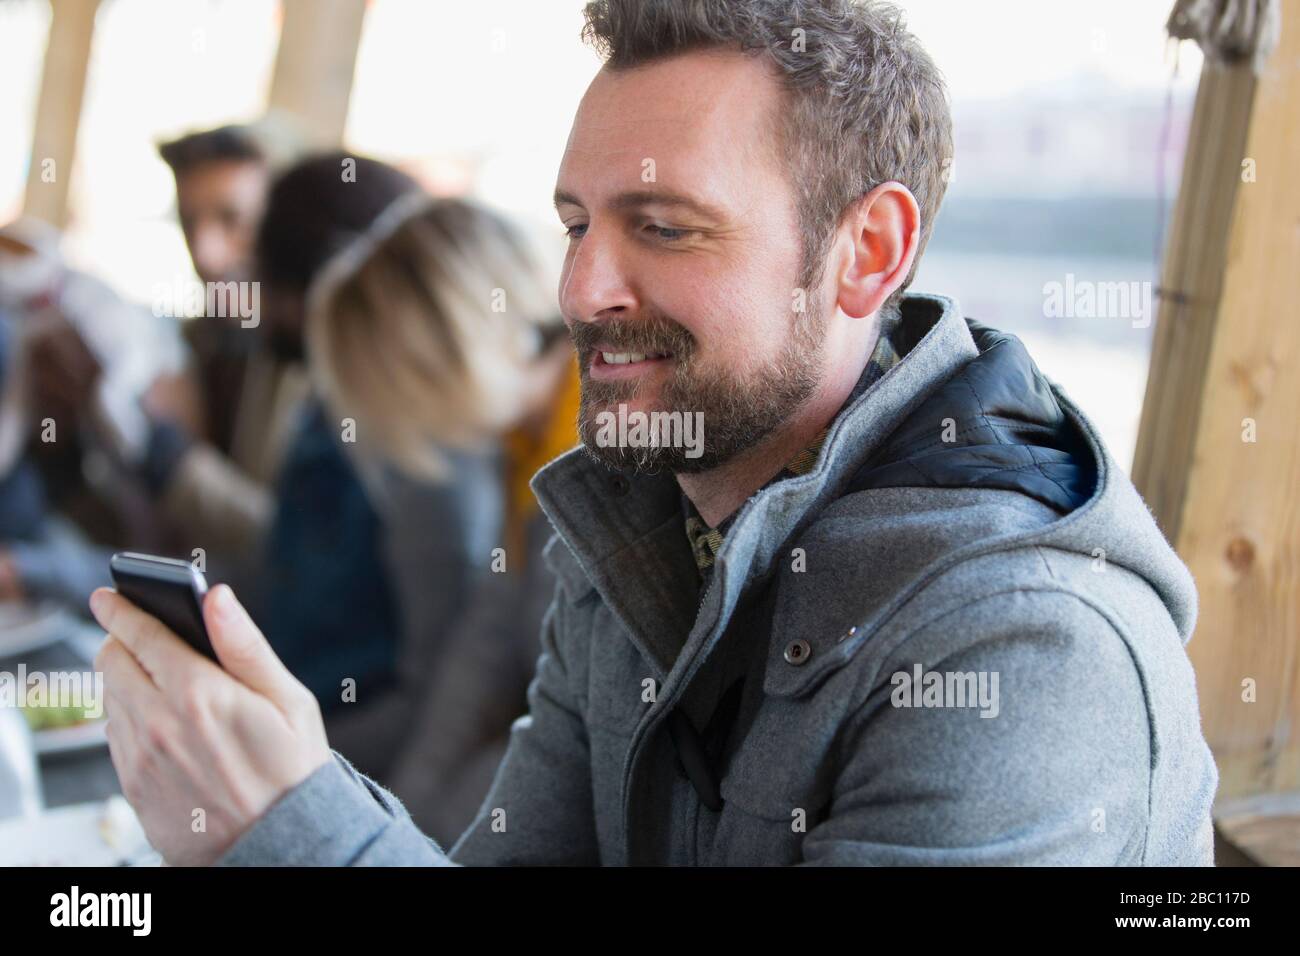 Man texting with smart phone Stock Photo